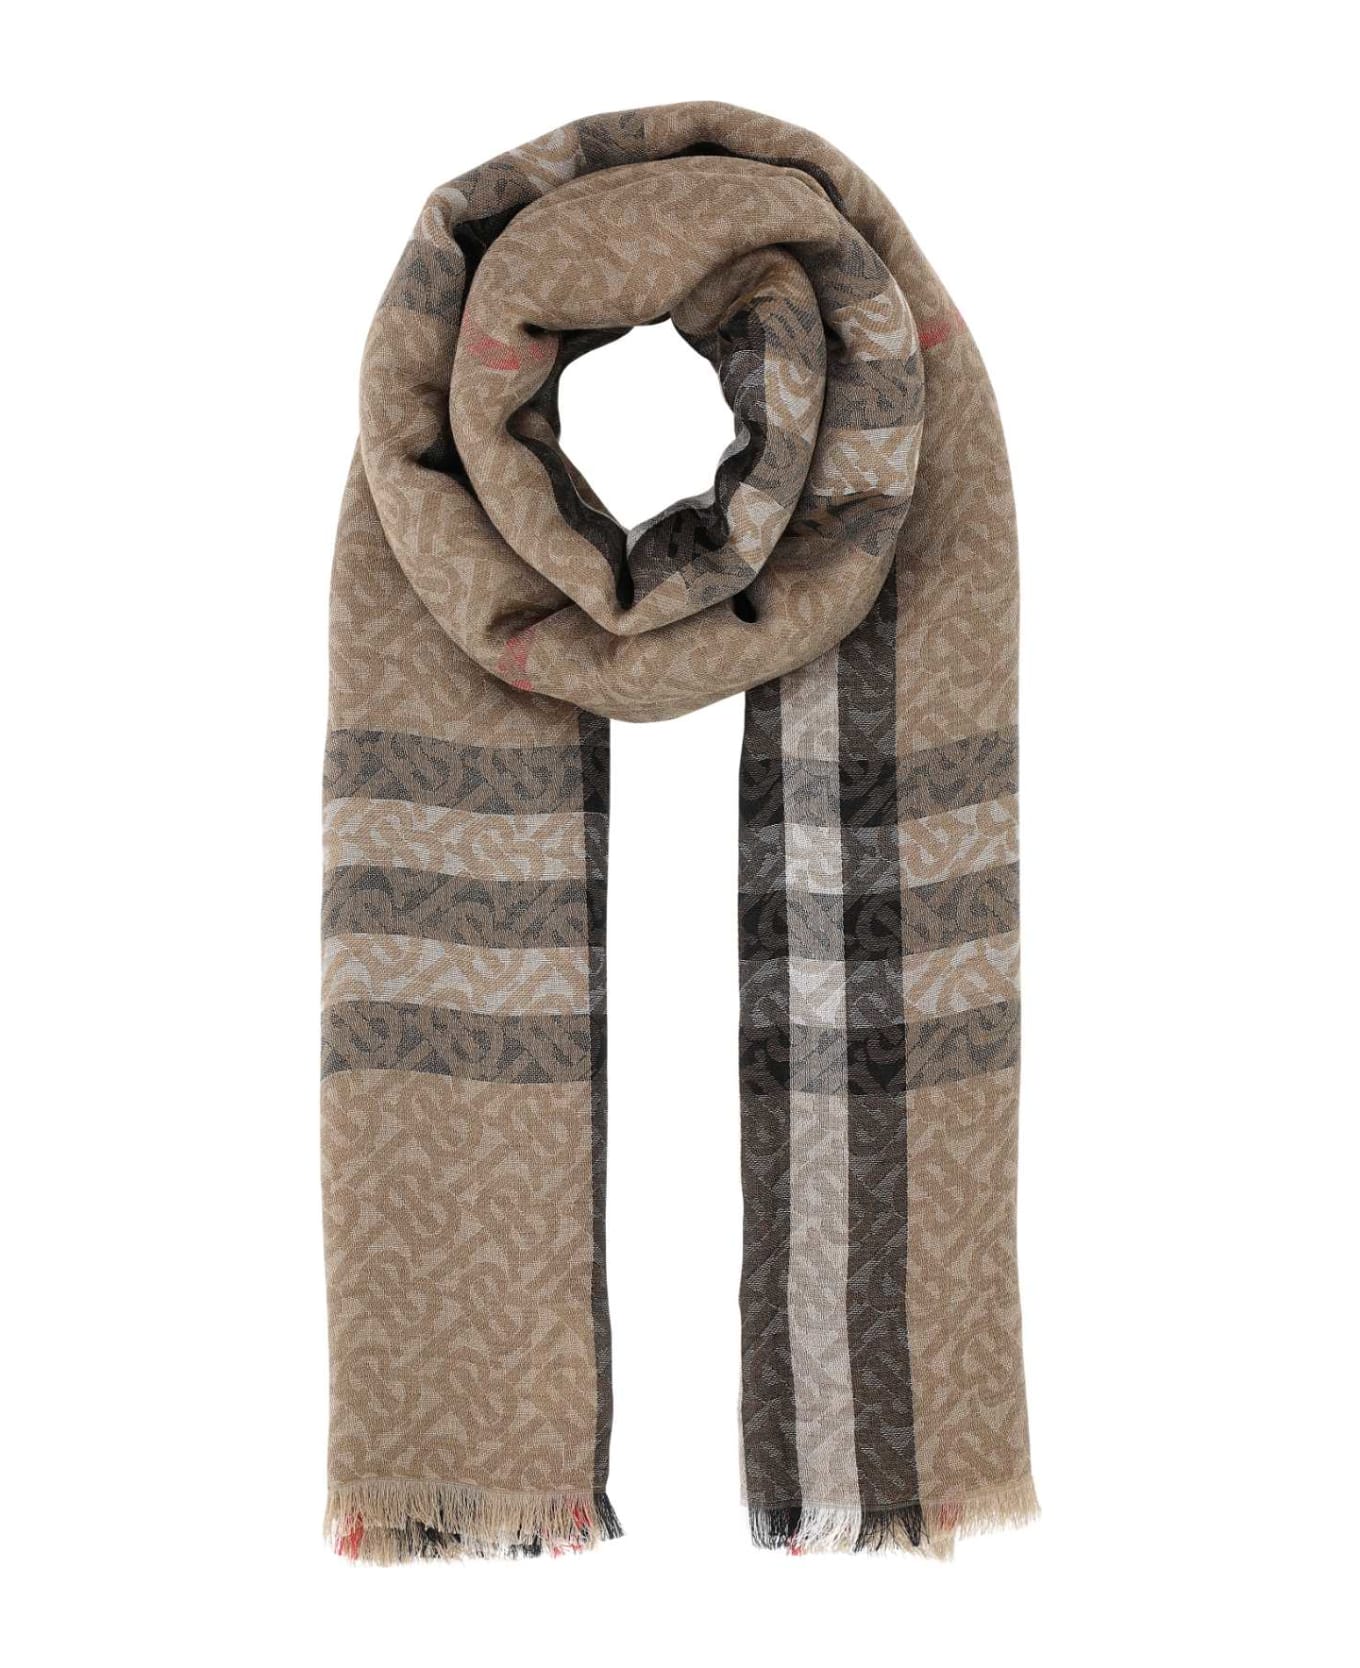 Burberry Embroidered Wool Blend Scarf - A7026